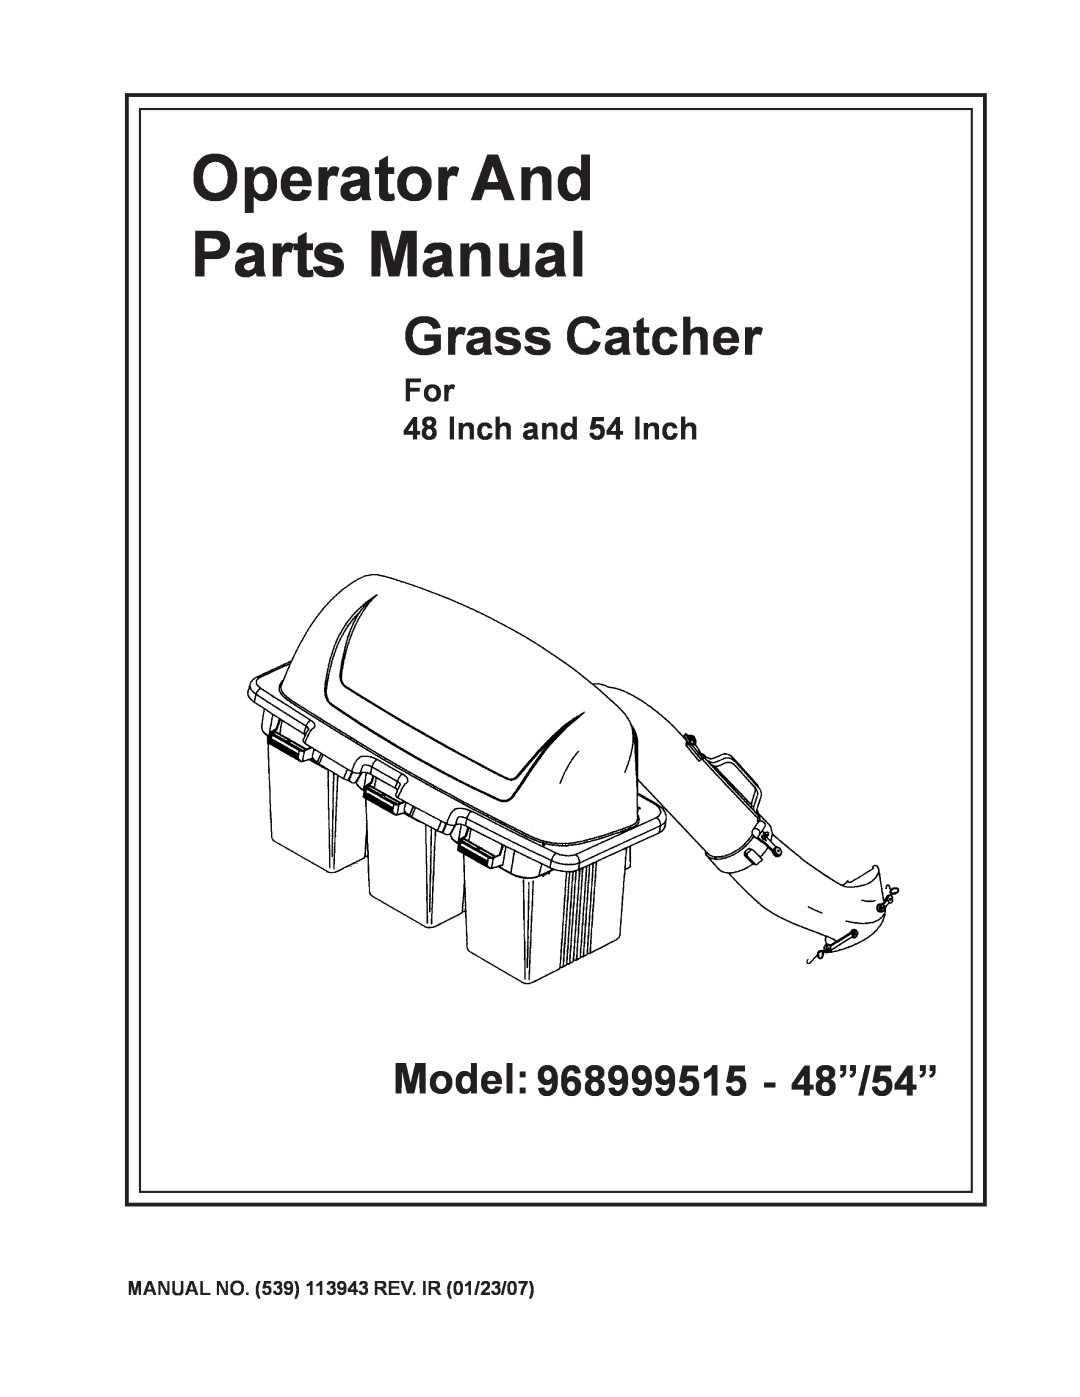 Dixon 968999515 manual Grass Catcher, For 48 Inch and 54 Inch, MANUAL NO. 539 113943 REV. IR 01/23/07 